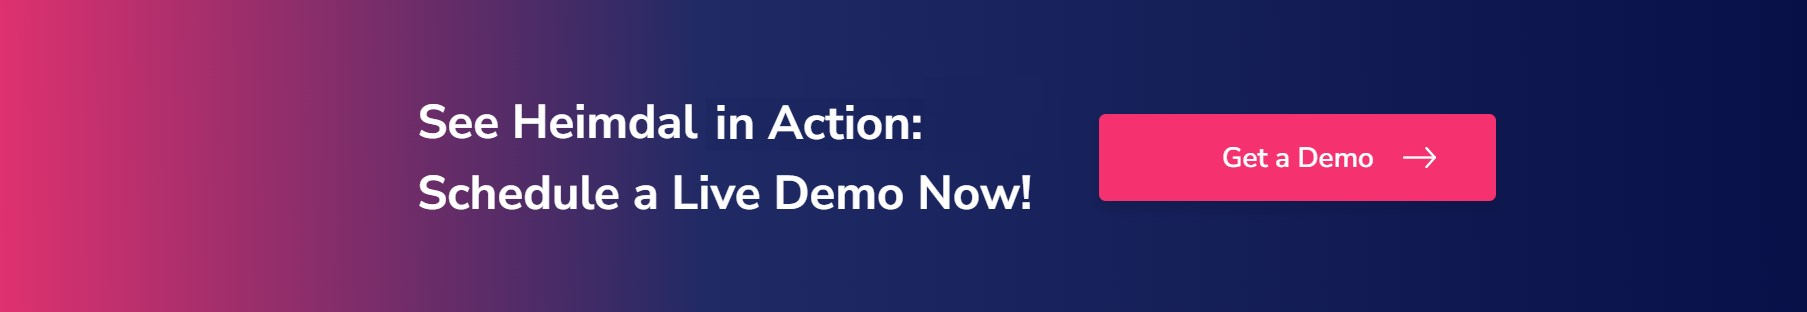 Heimdal call to action button. Schedule a live demo!